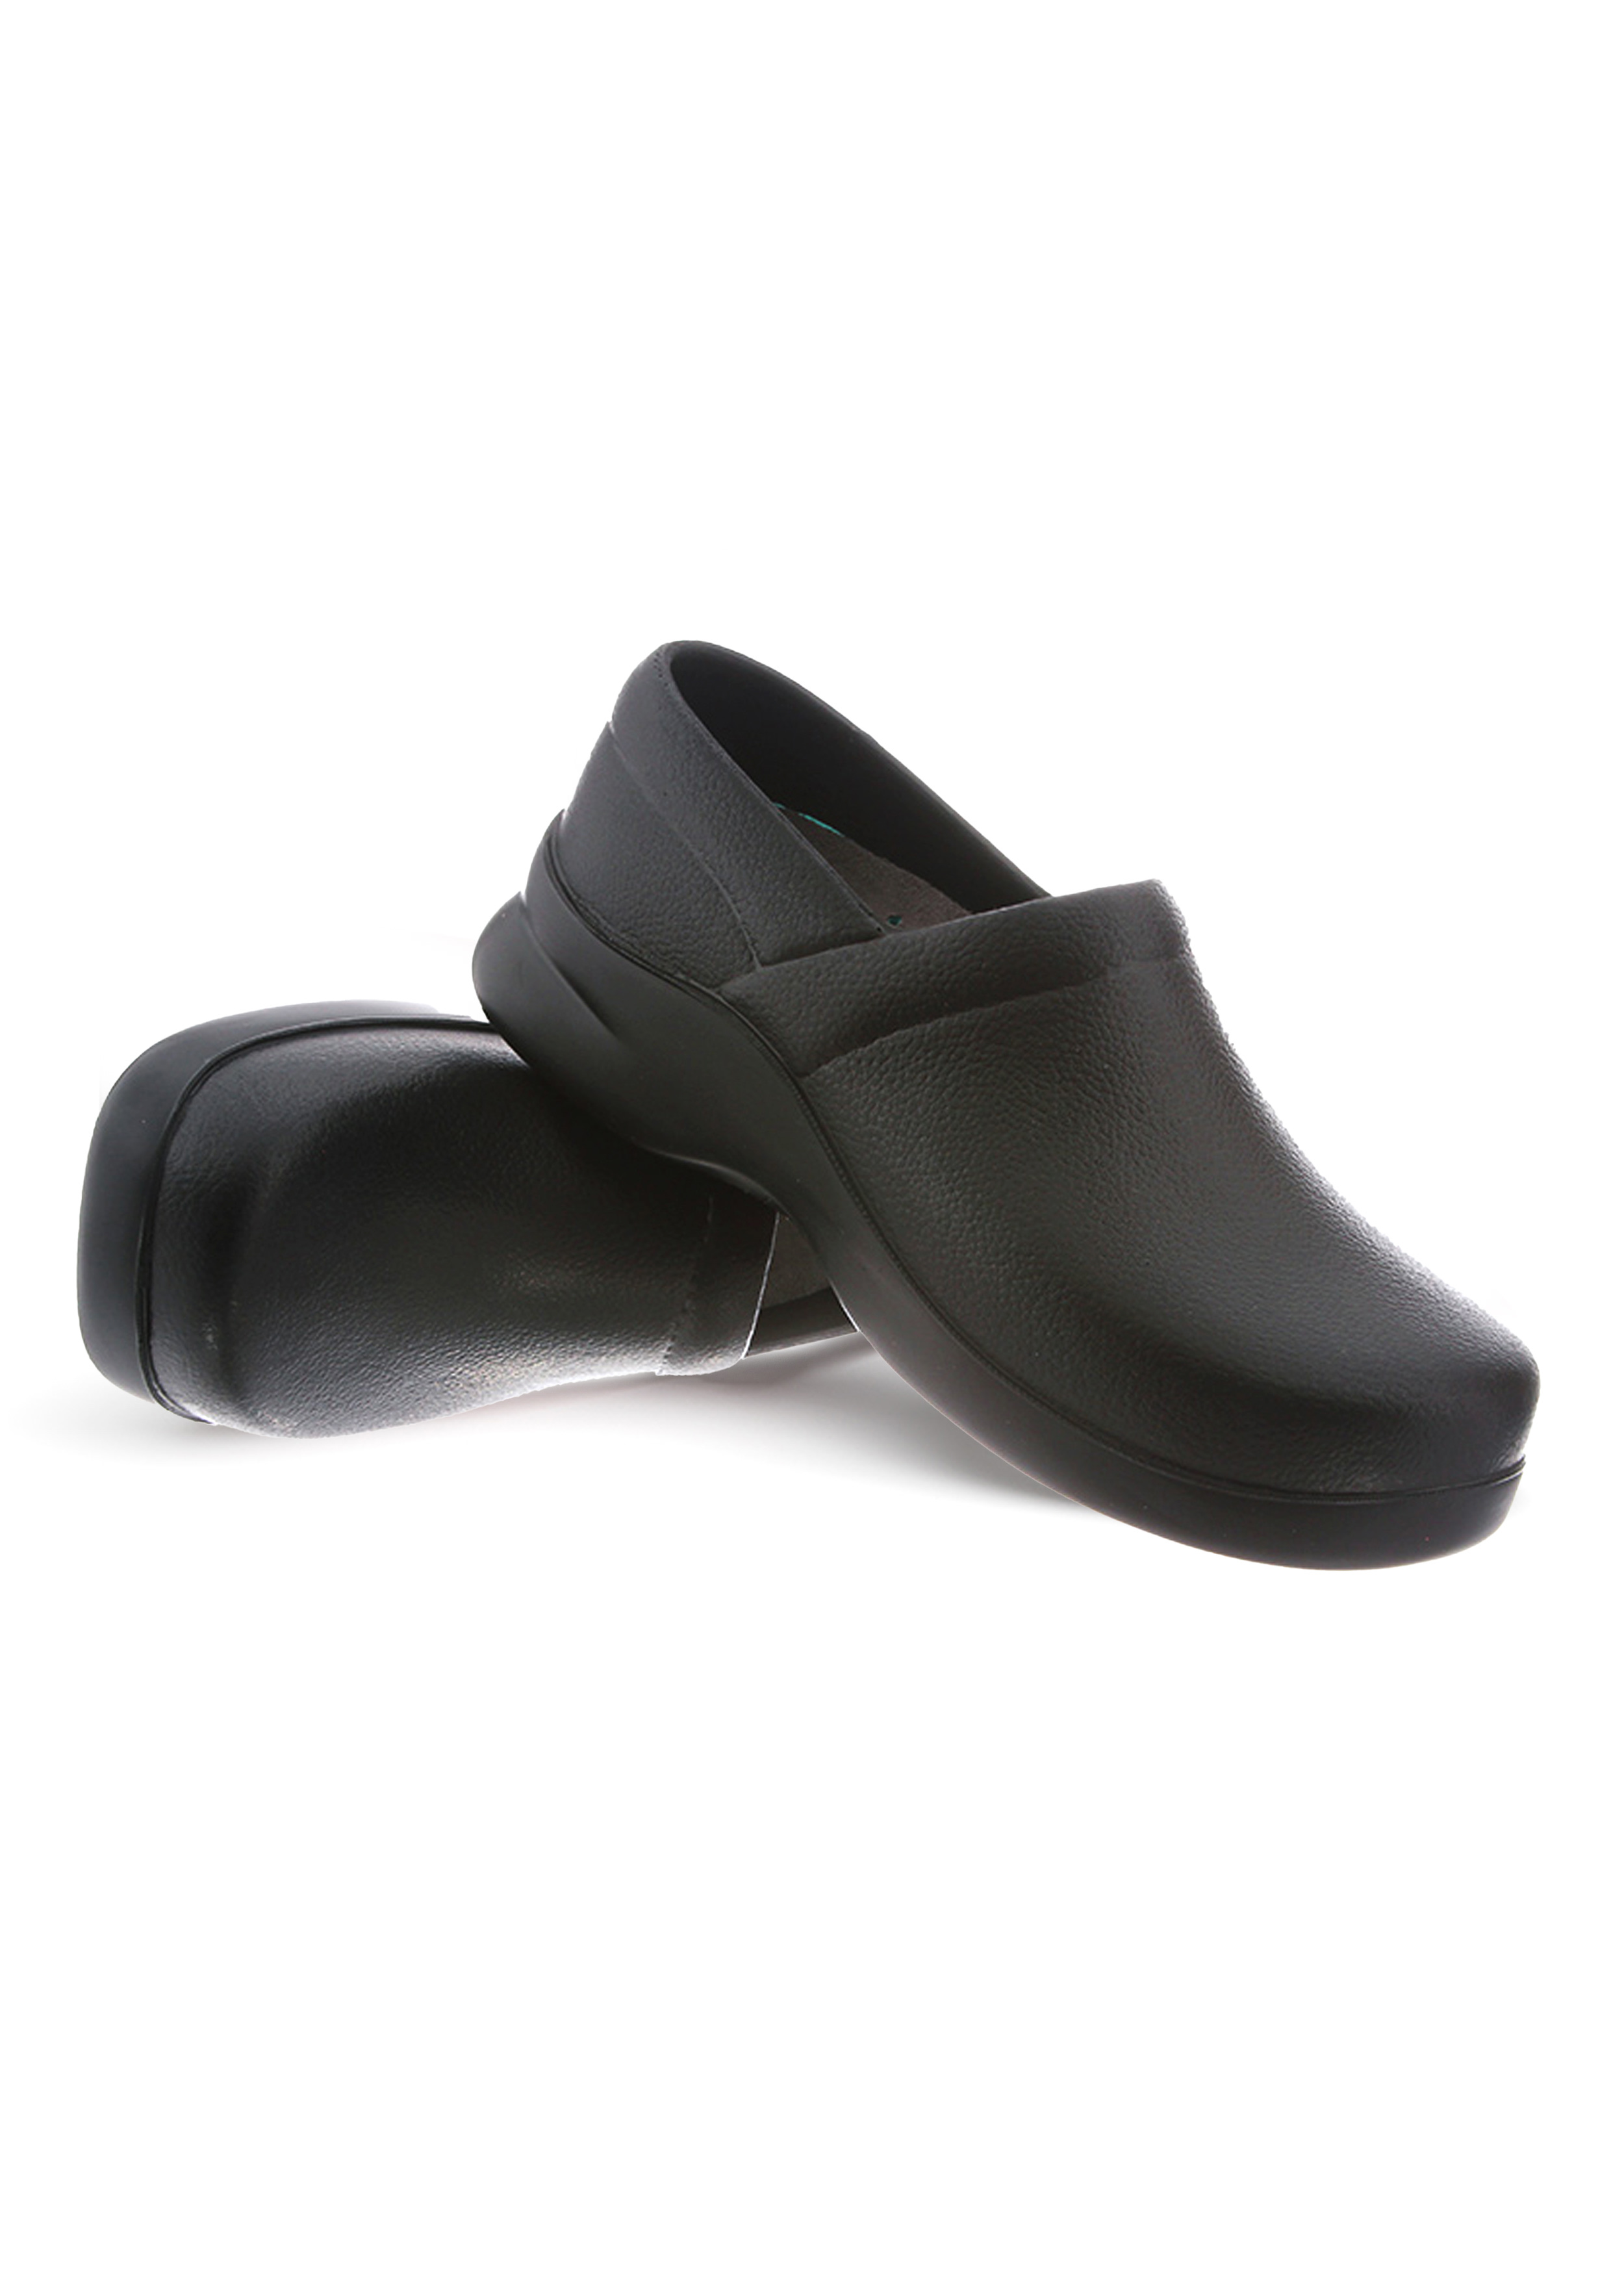 Comfortable Nurse Shoes and Clogs for Healthcare Workers